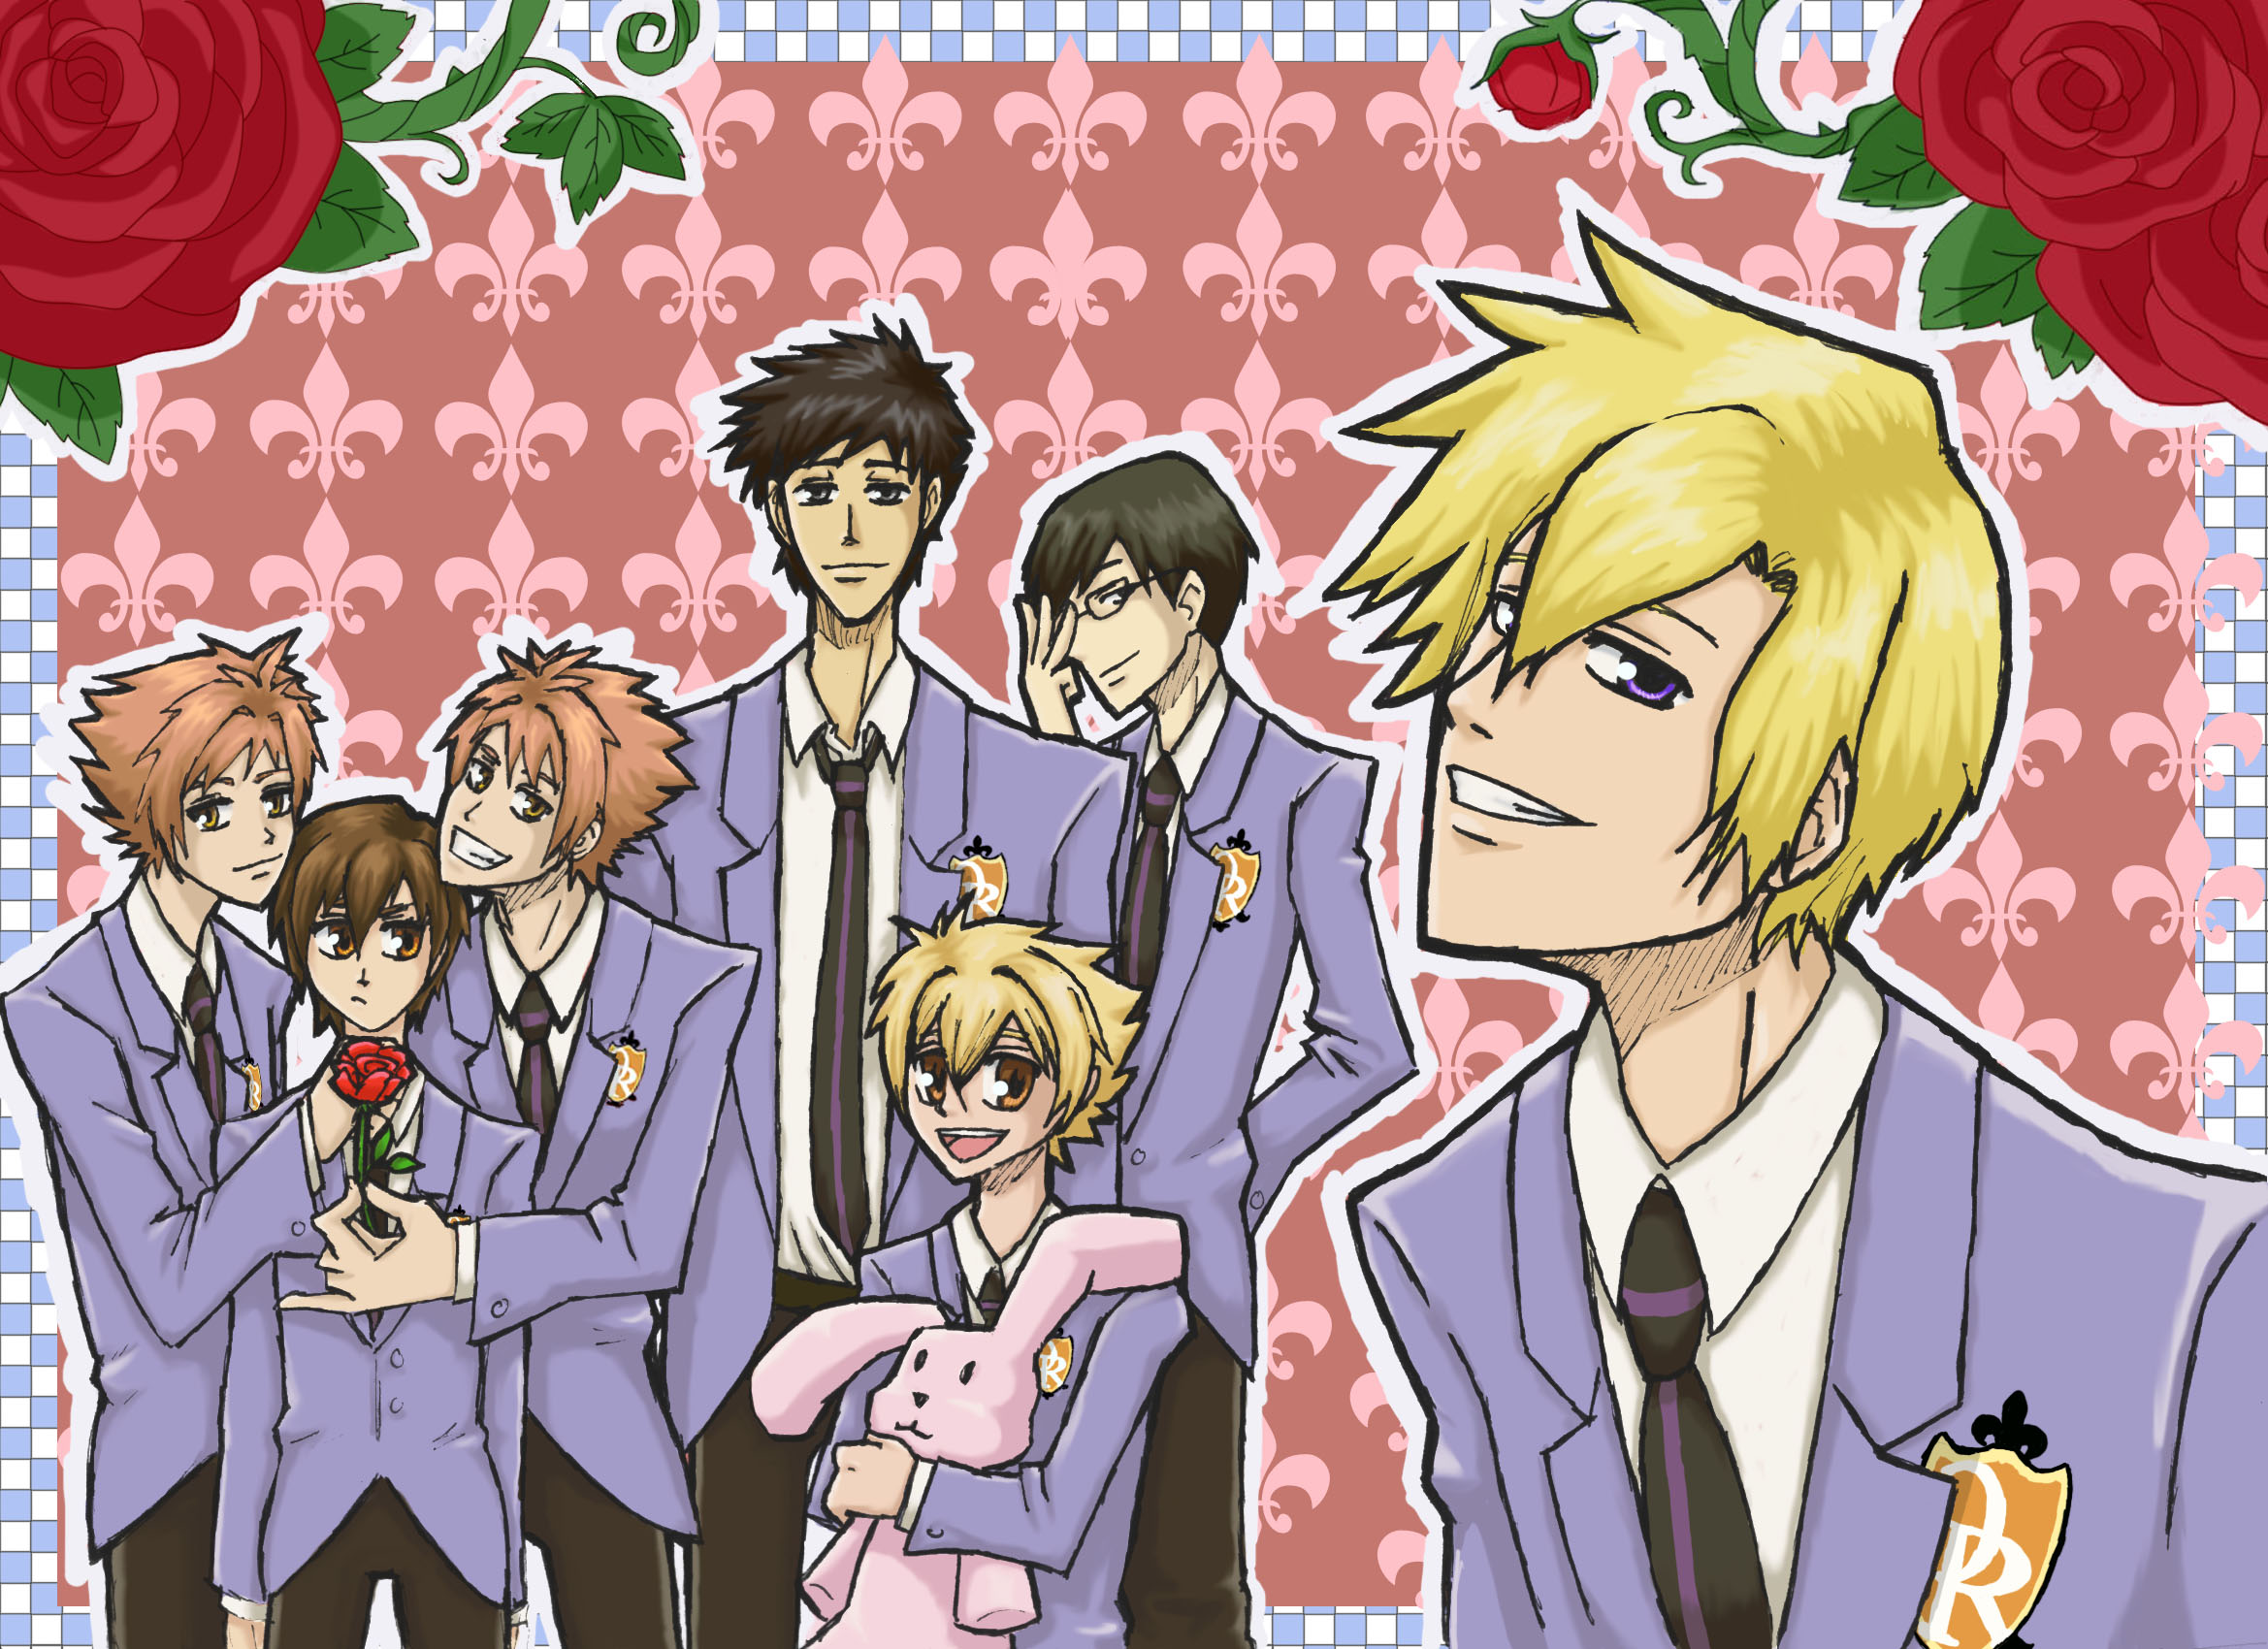 HD desktop wallpaper featuring characters from Ouran High School Host Club with a floral background.